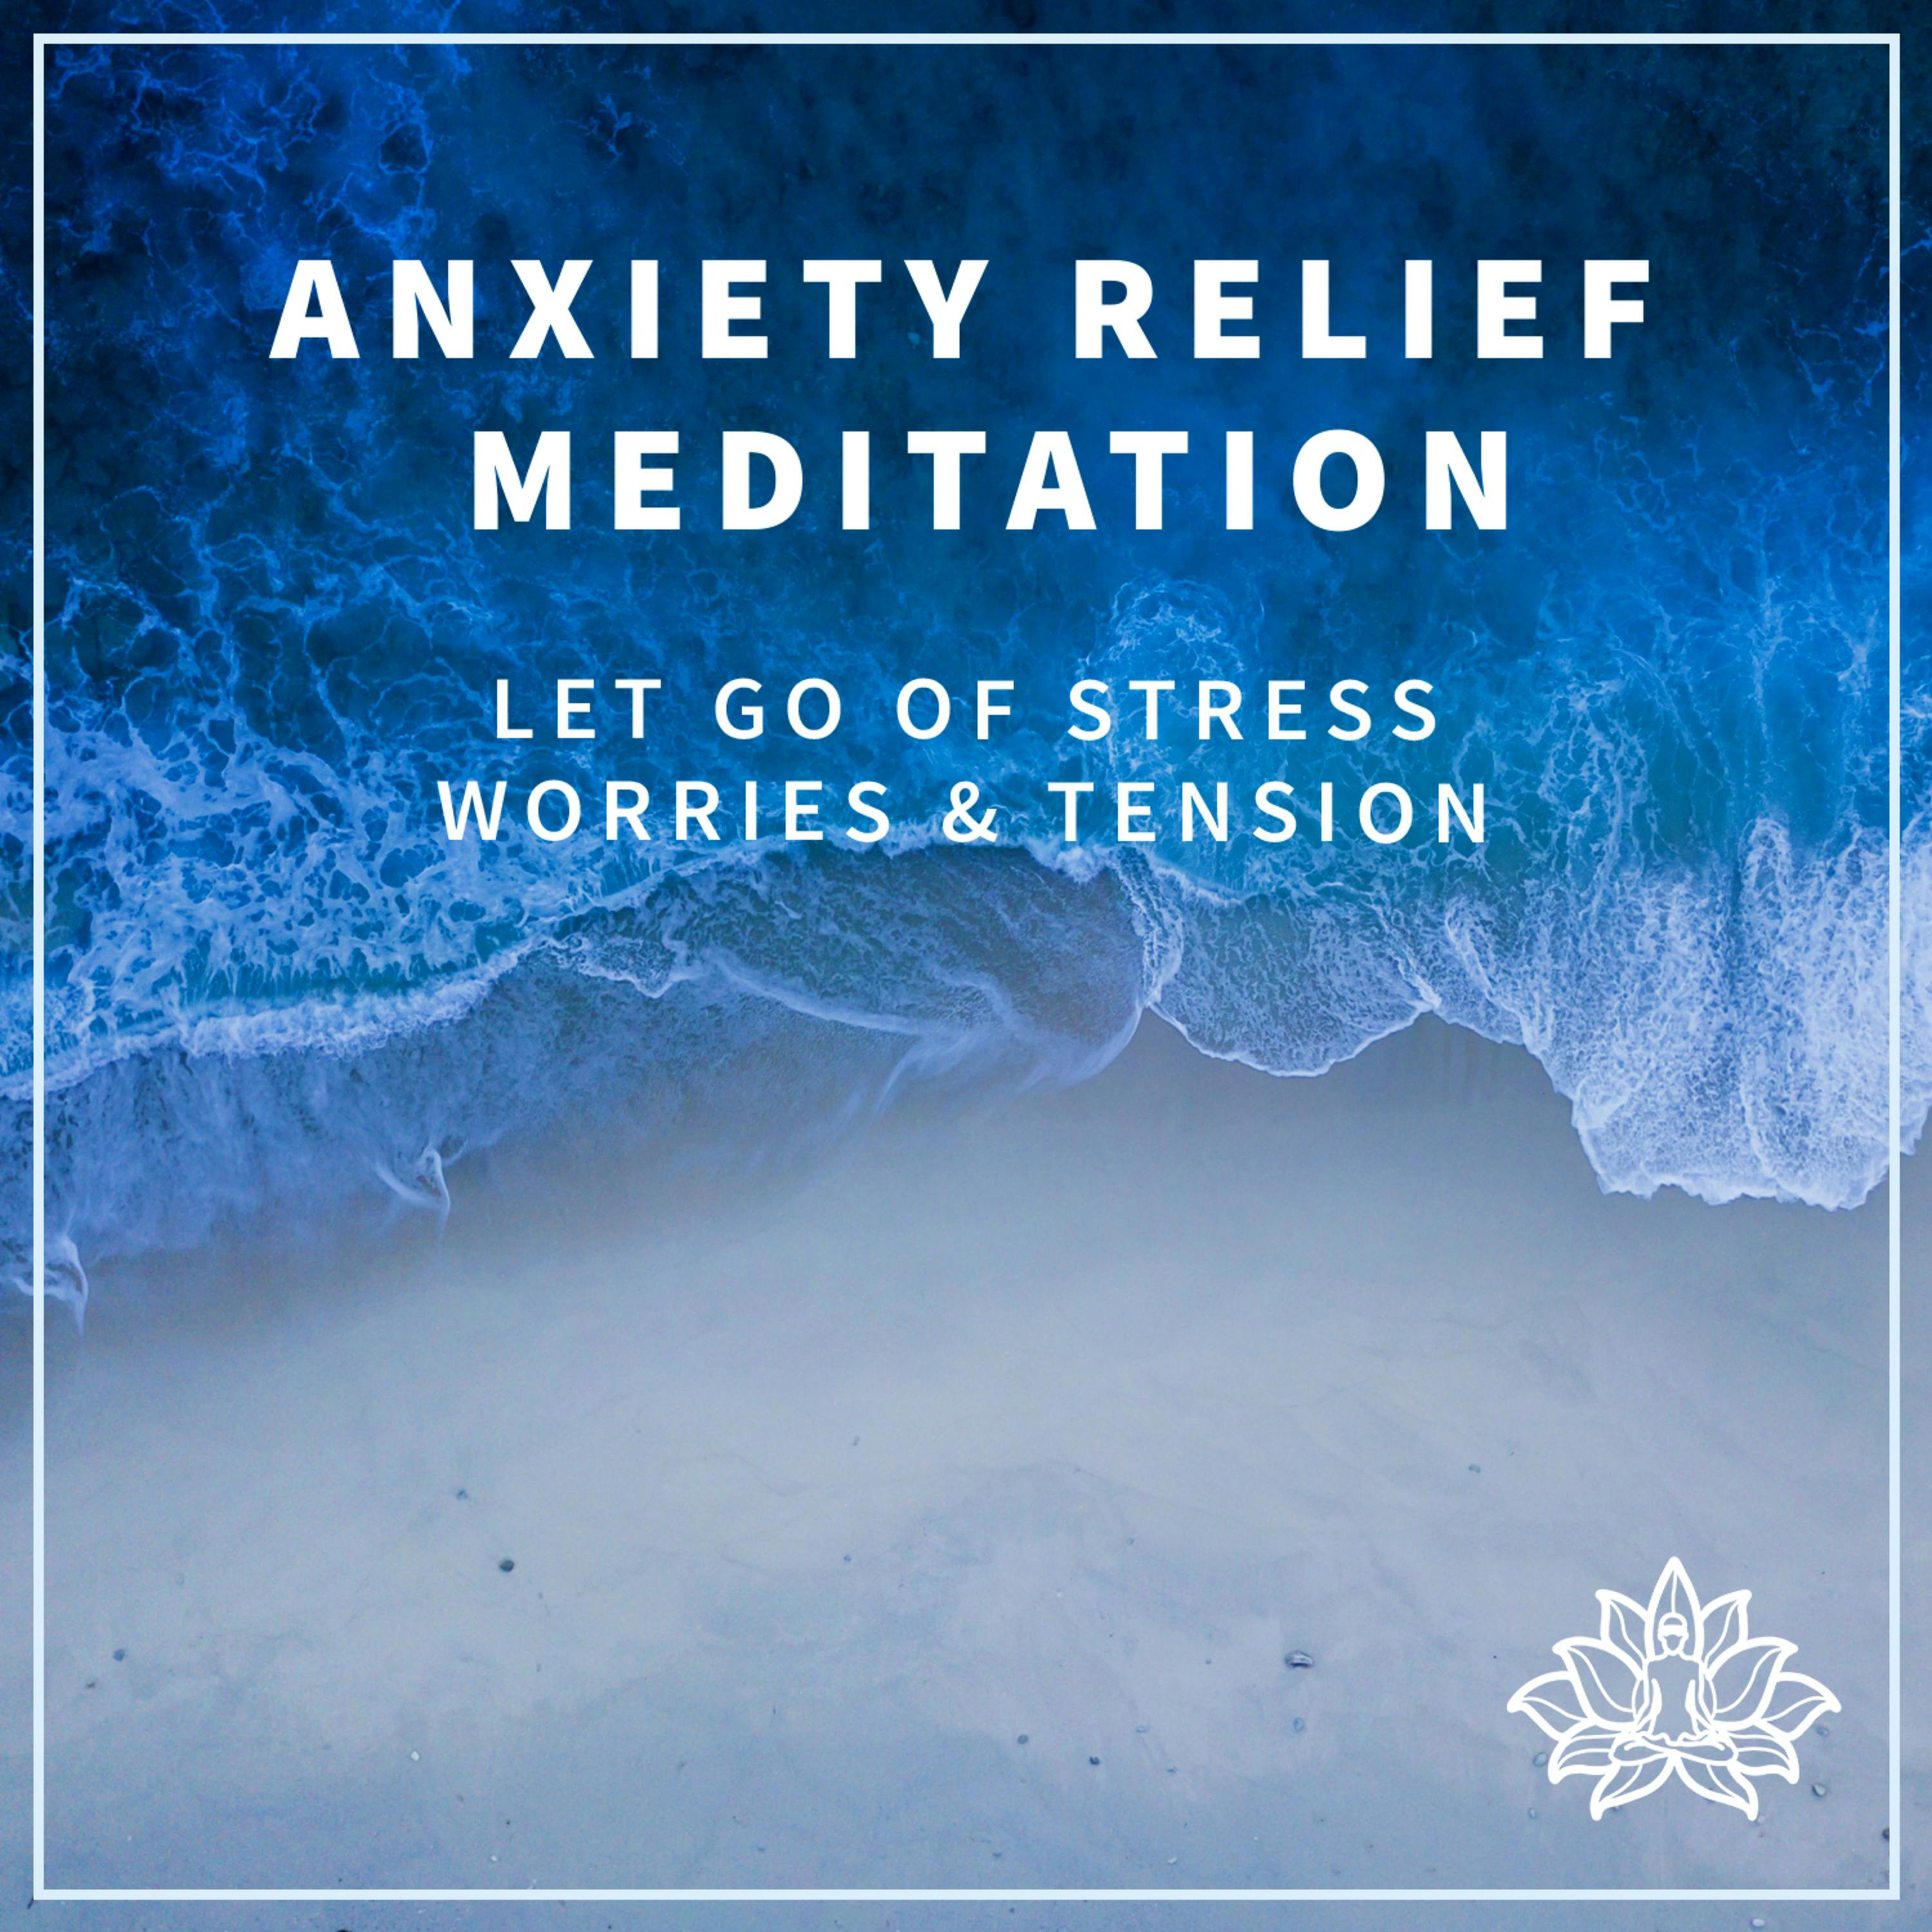 #9 ANXIETY RELIEF MEDITATION - Let go of Stress, Worries & Tension 🙏💫 - IMMERSIVE GUIDED MEDITATION 💖